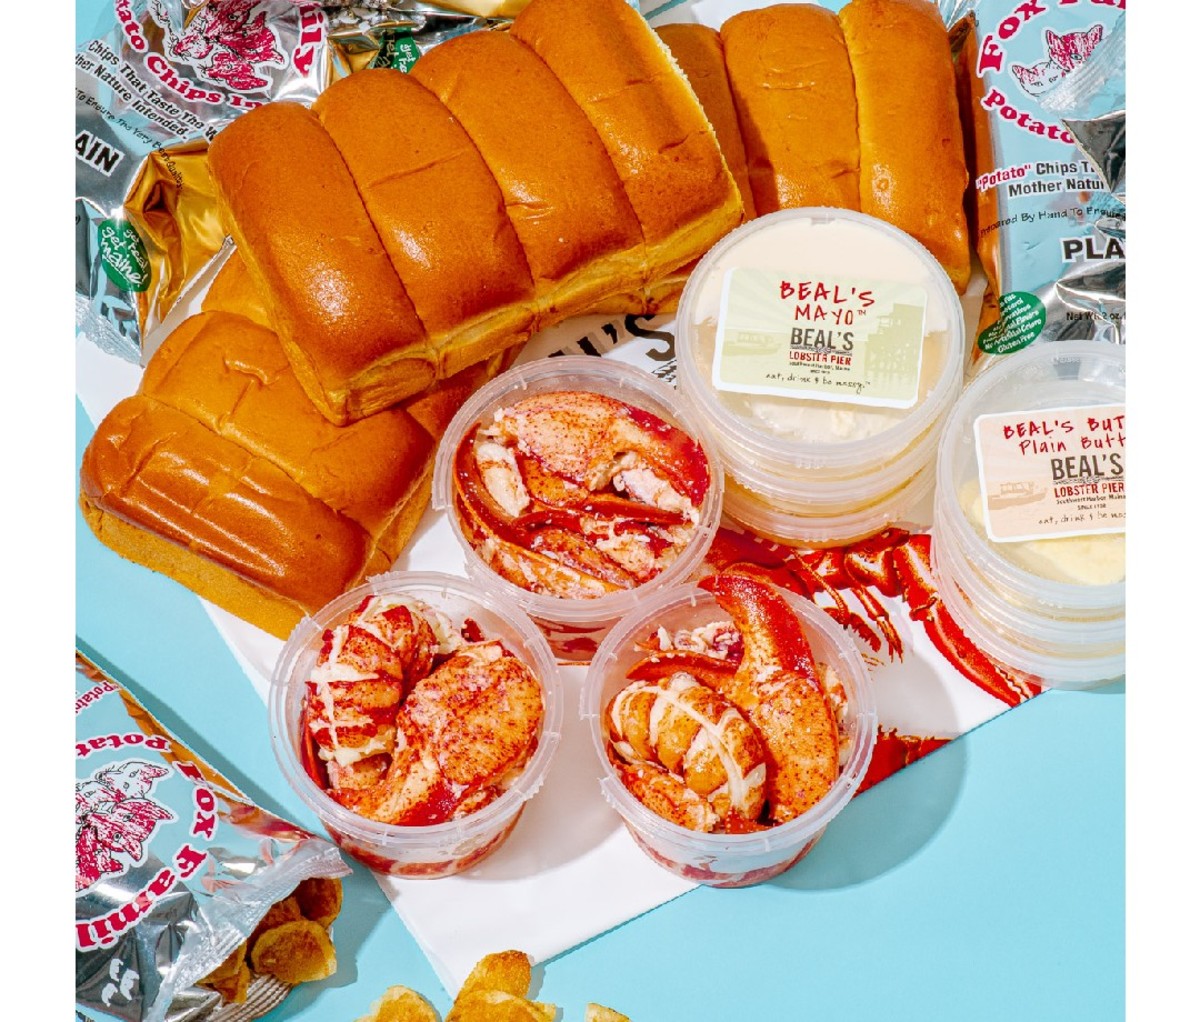 Goldbelly Subscriptions' display of lobster roll ingredients, including a row of buns, and several containers of fresh lobster